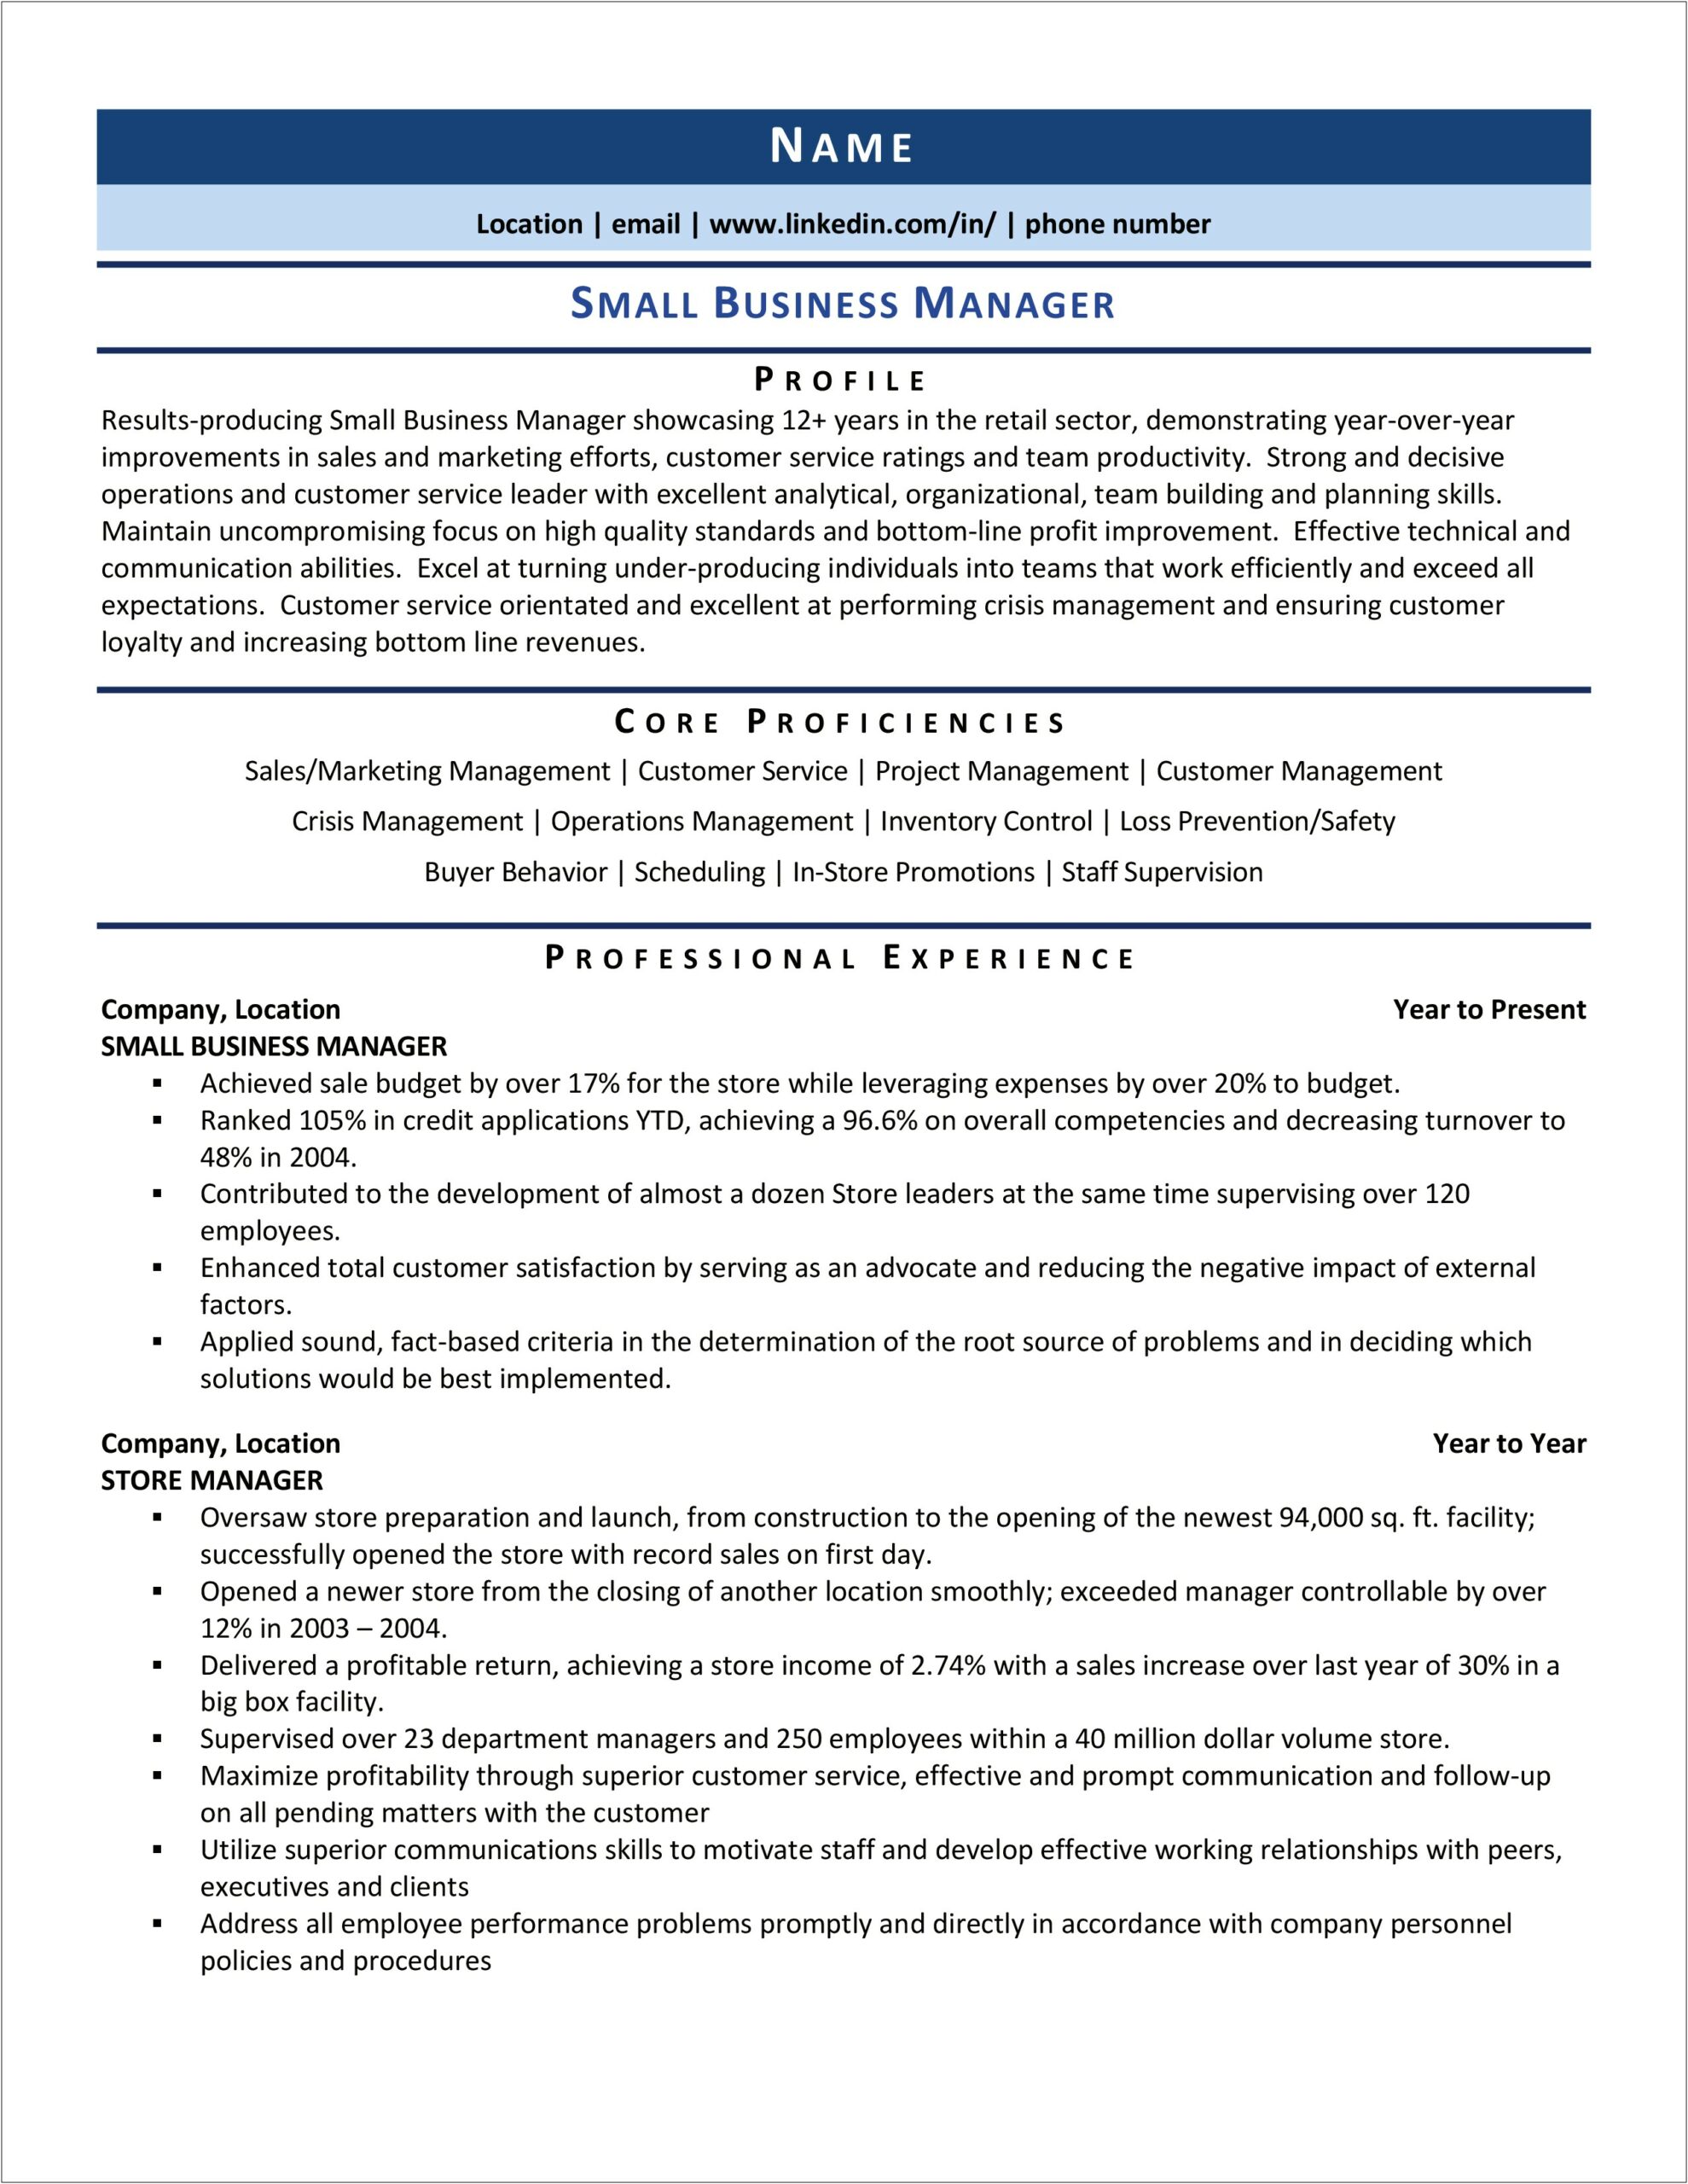 Where To Put Industry Type On Resume